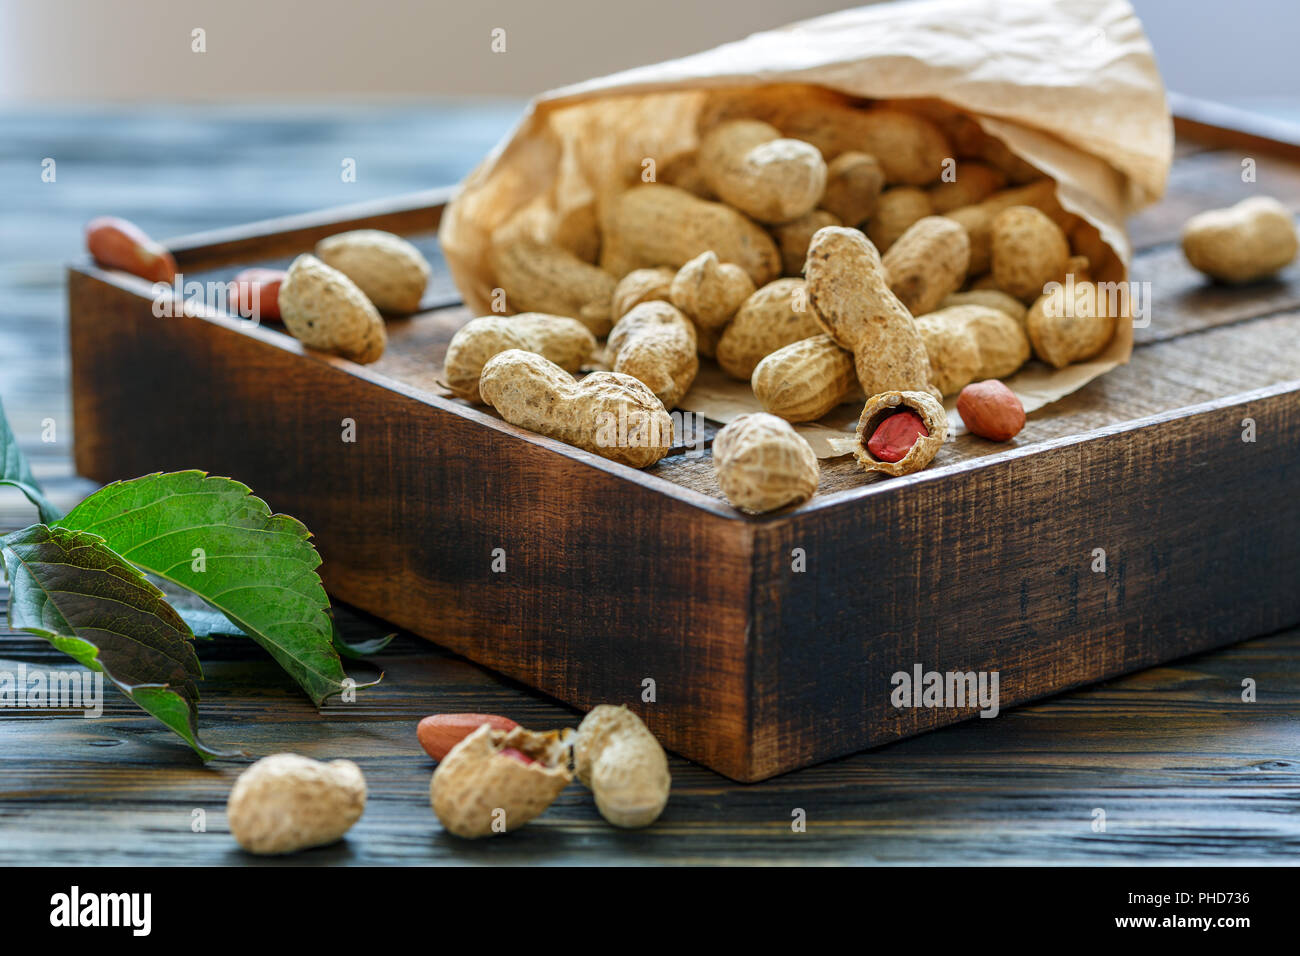 Unshelled peanuts in a paper bag. Stock Photo